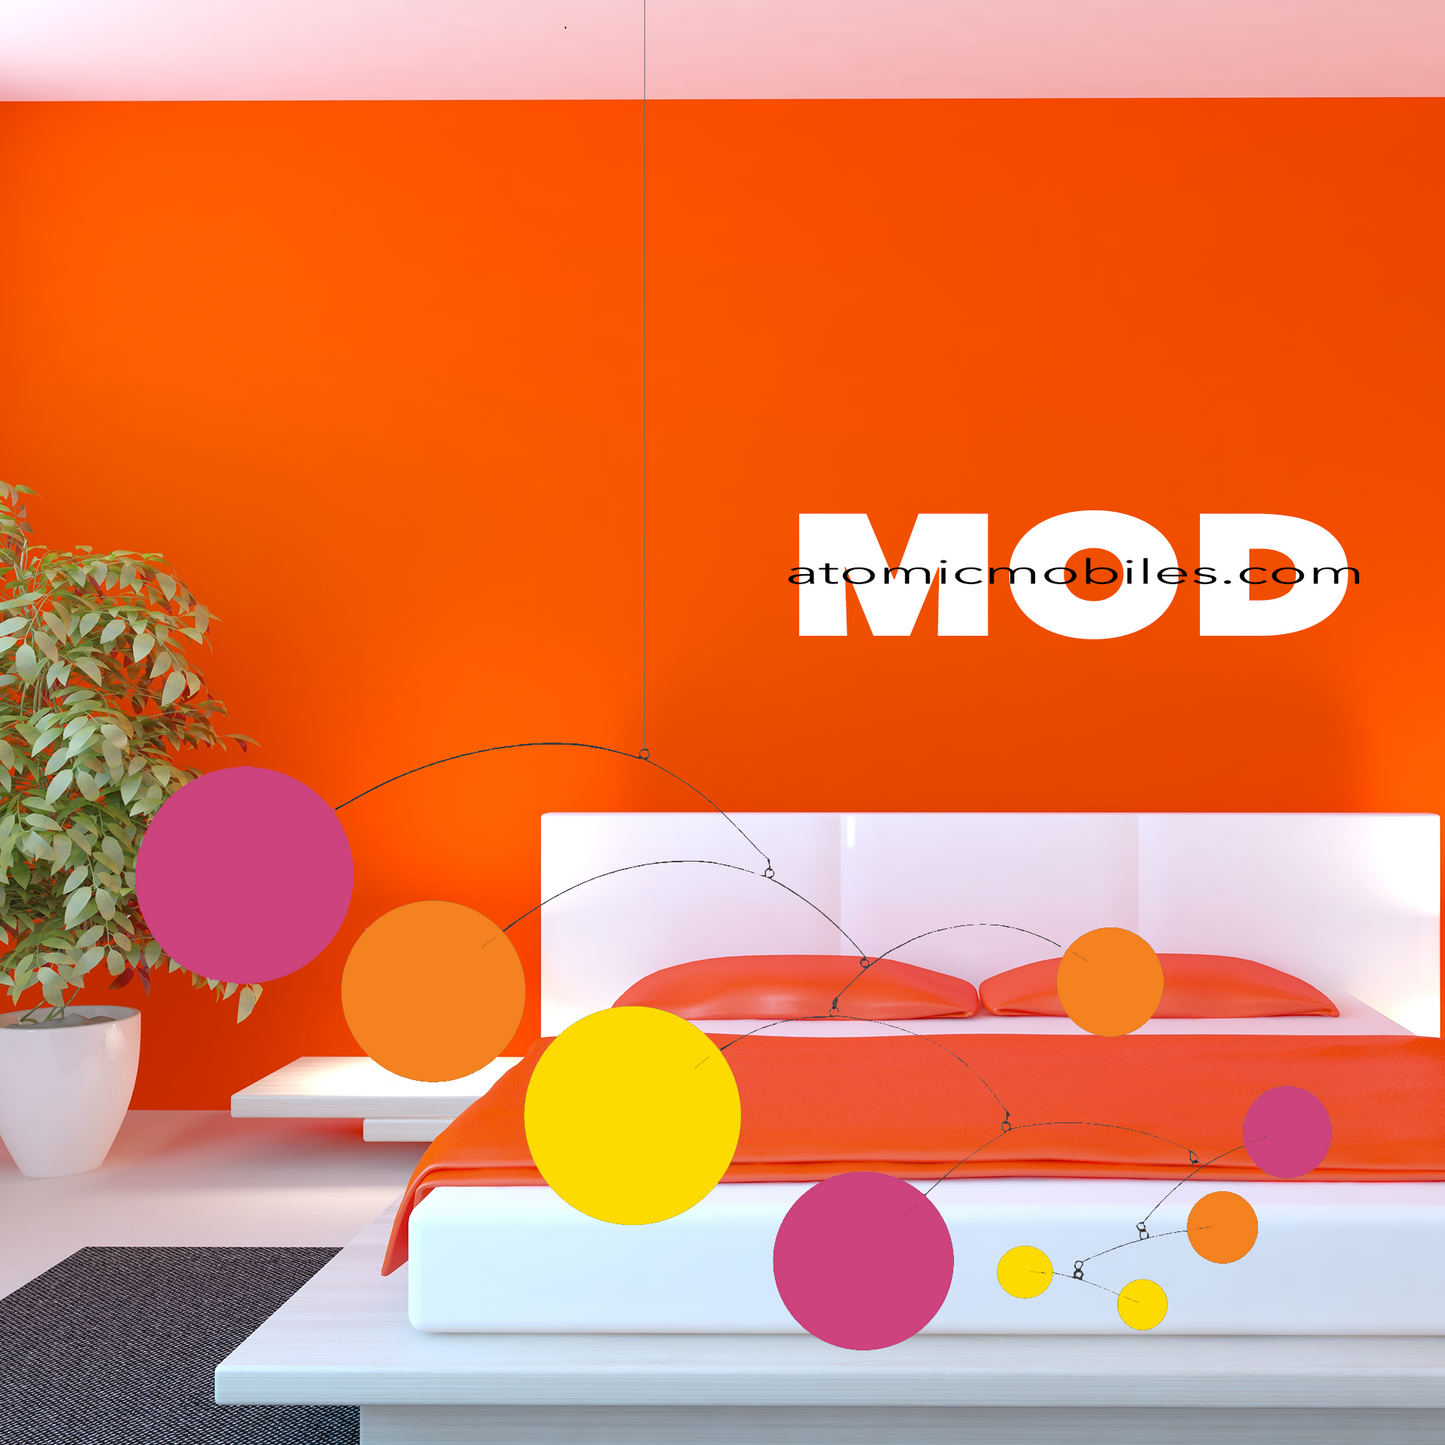 Groovy MOD Mobile in custom colors of Hot Pink, Tangerine Orange, and Yellow in bright orange bedroom with plant and white bed with orange bed sheets - hanging art mobiles in retro style by AtomicMobiles.com